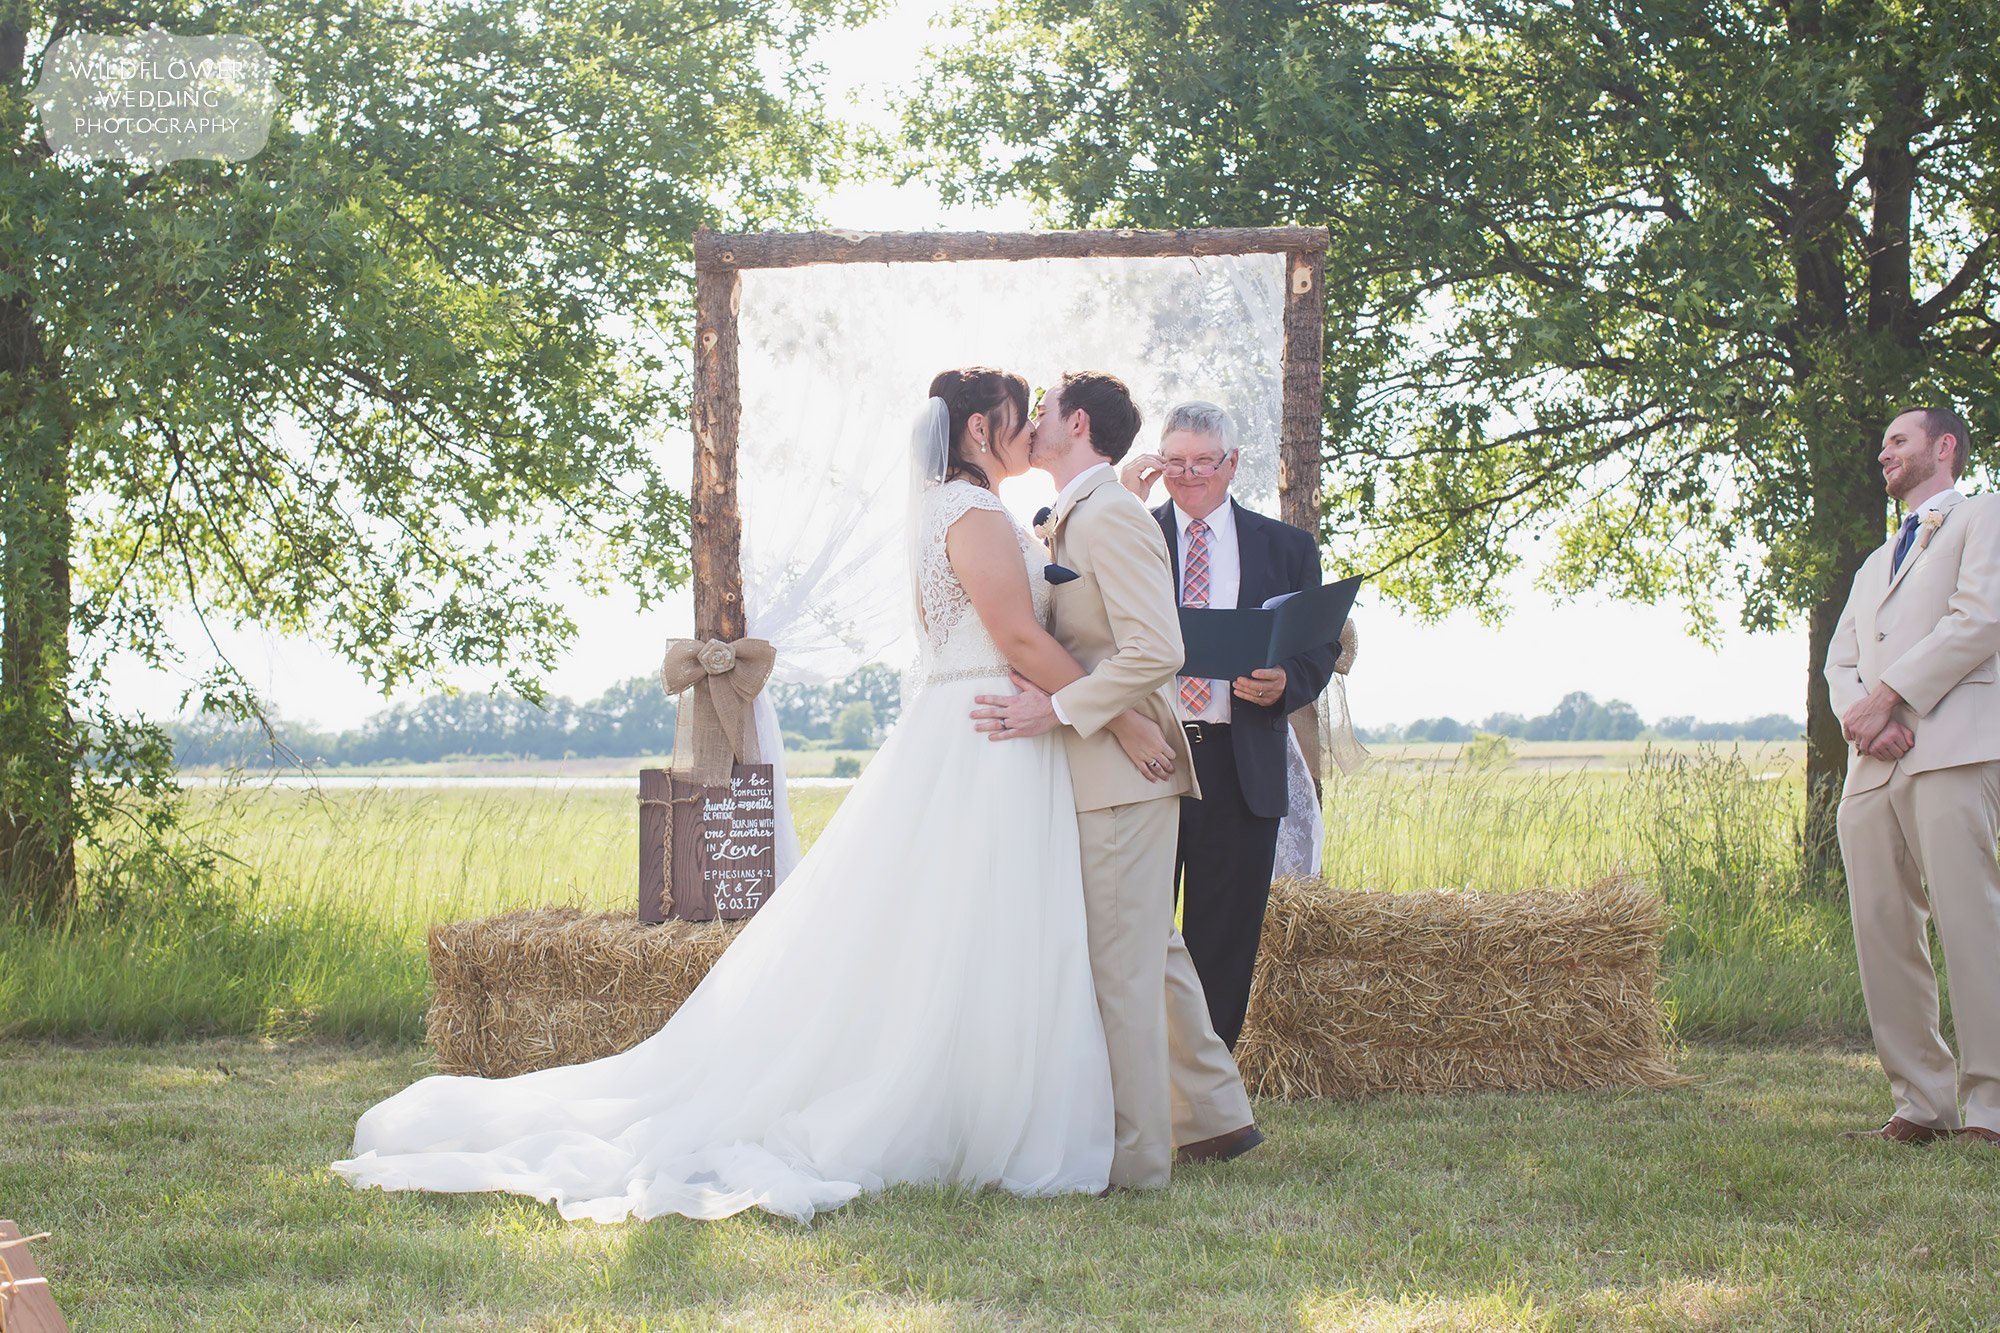 Ceremony kiss during this country wedding in Columbia at Bradford Farm.